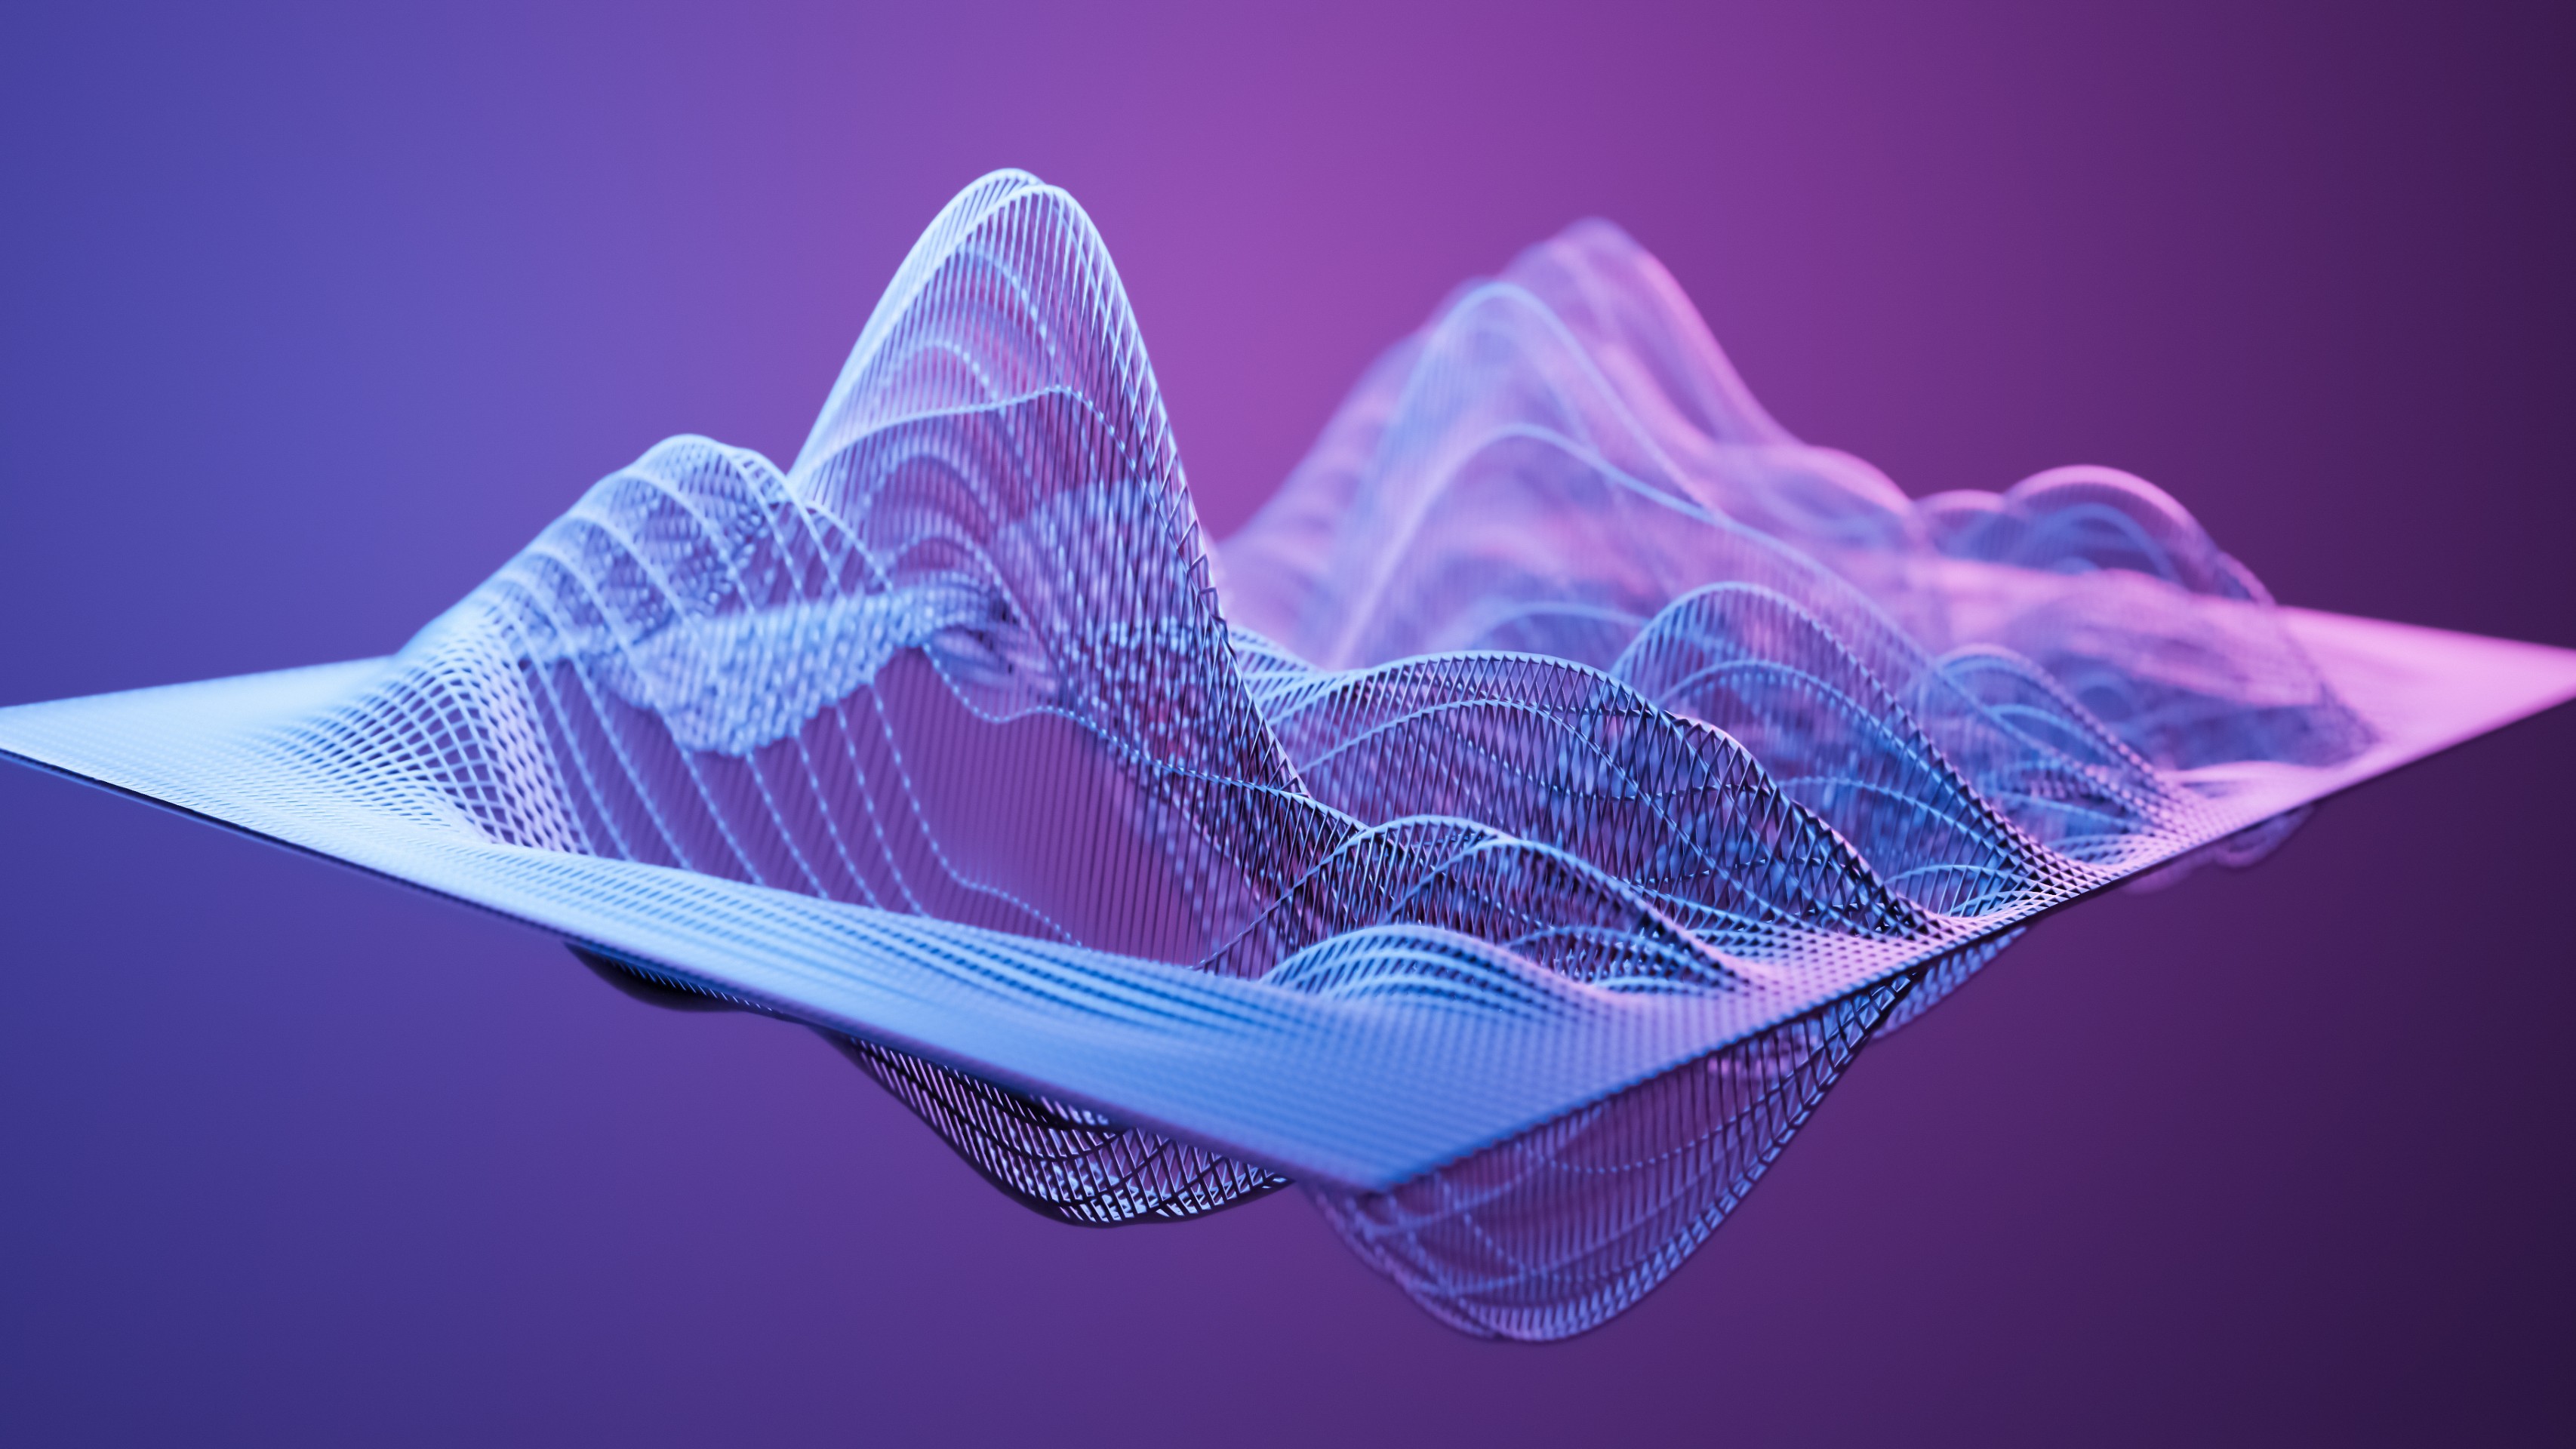 A digital representation of a 3D mesh structure with wavy, interconnected lines on a gradient purple background.